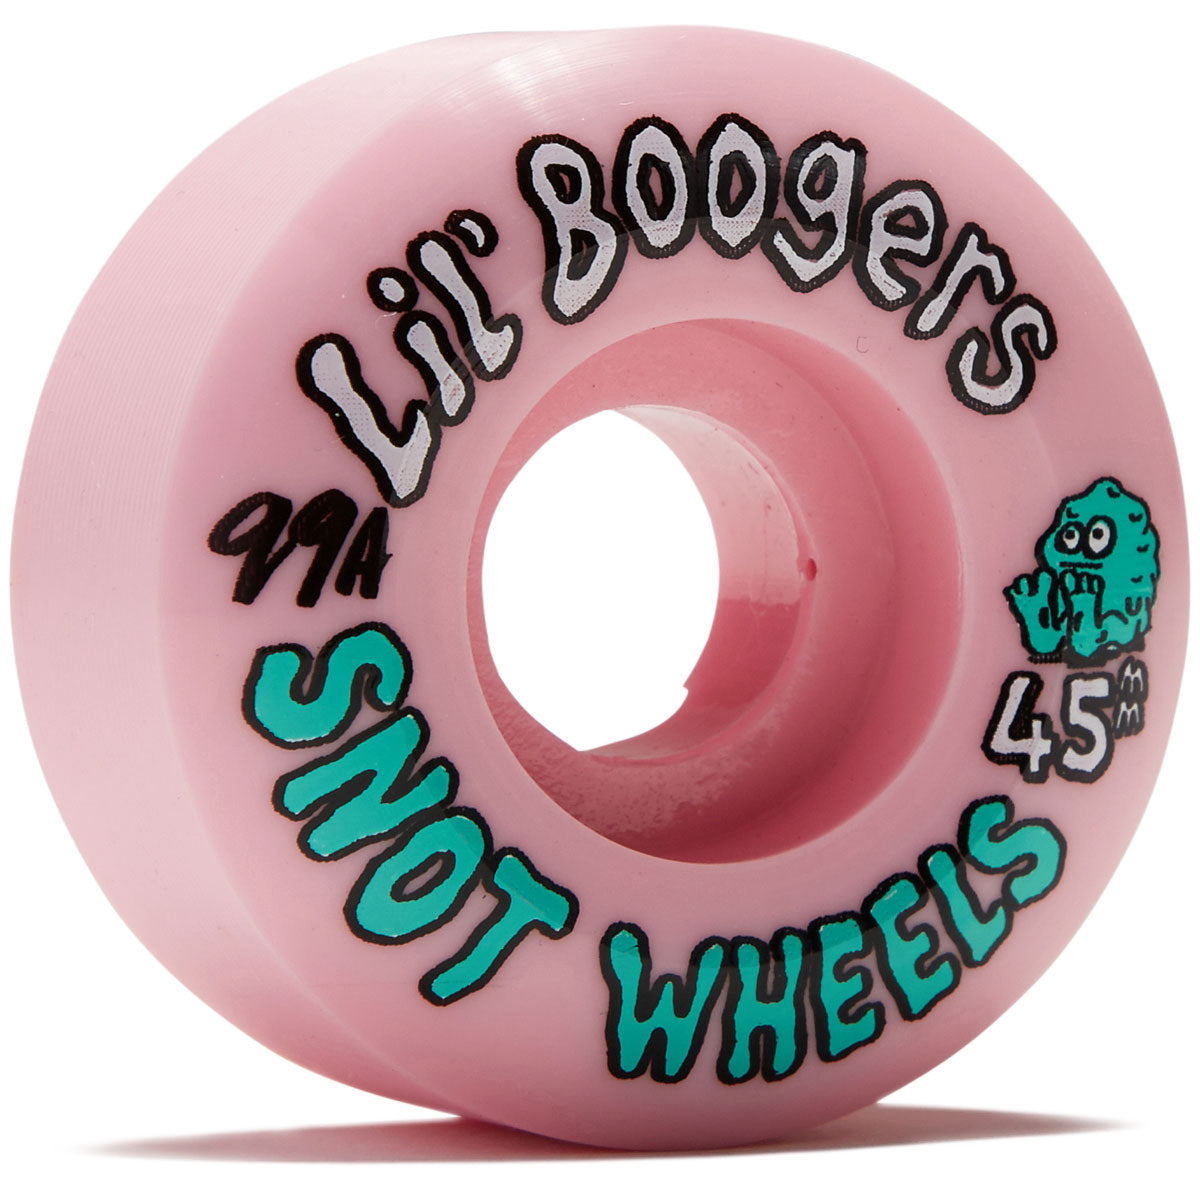 Snot Lil Boogers 99a Skateboard Wheels - Pink - 45mm image 1